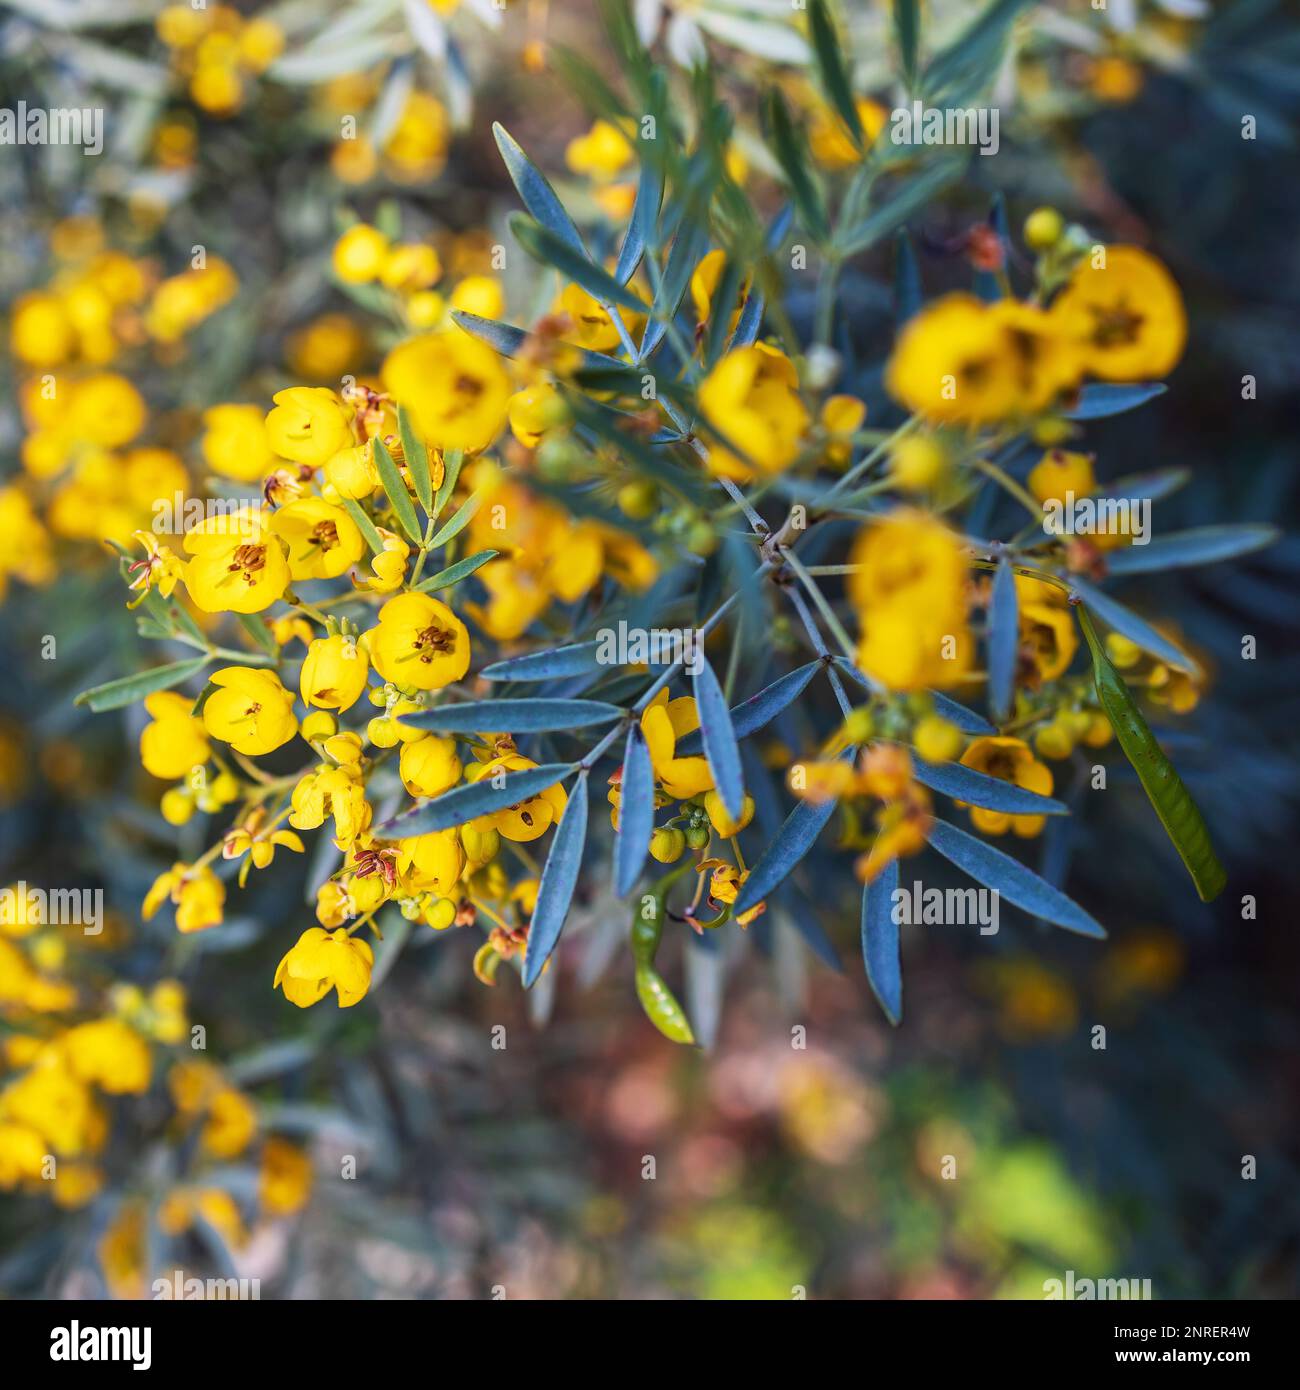 Senna artemisioides, the wormwood senna, is a species of flowering plant in the pea family Fabaceae. Square frame Stock Photo